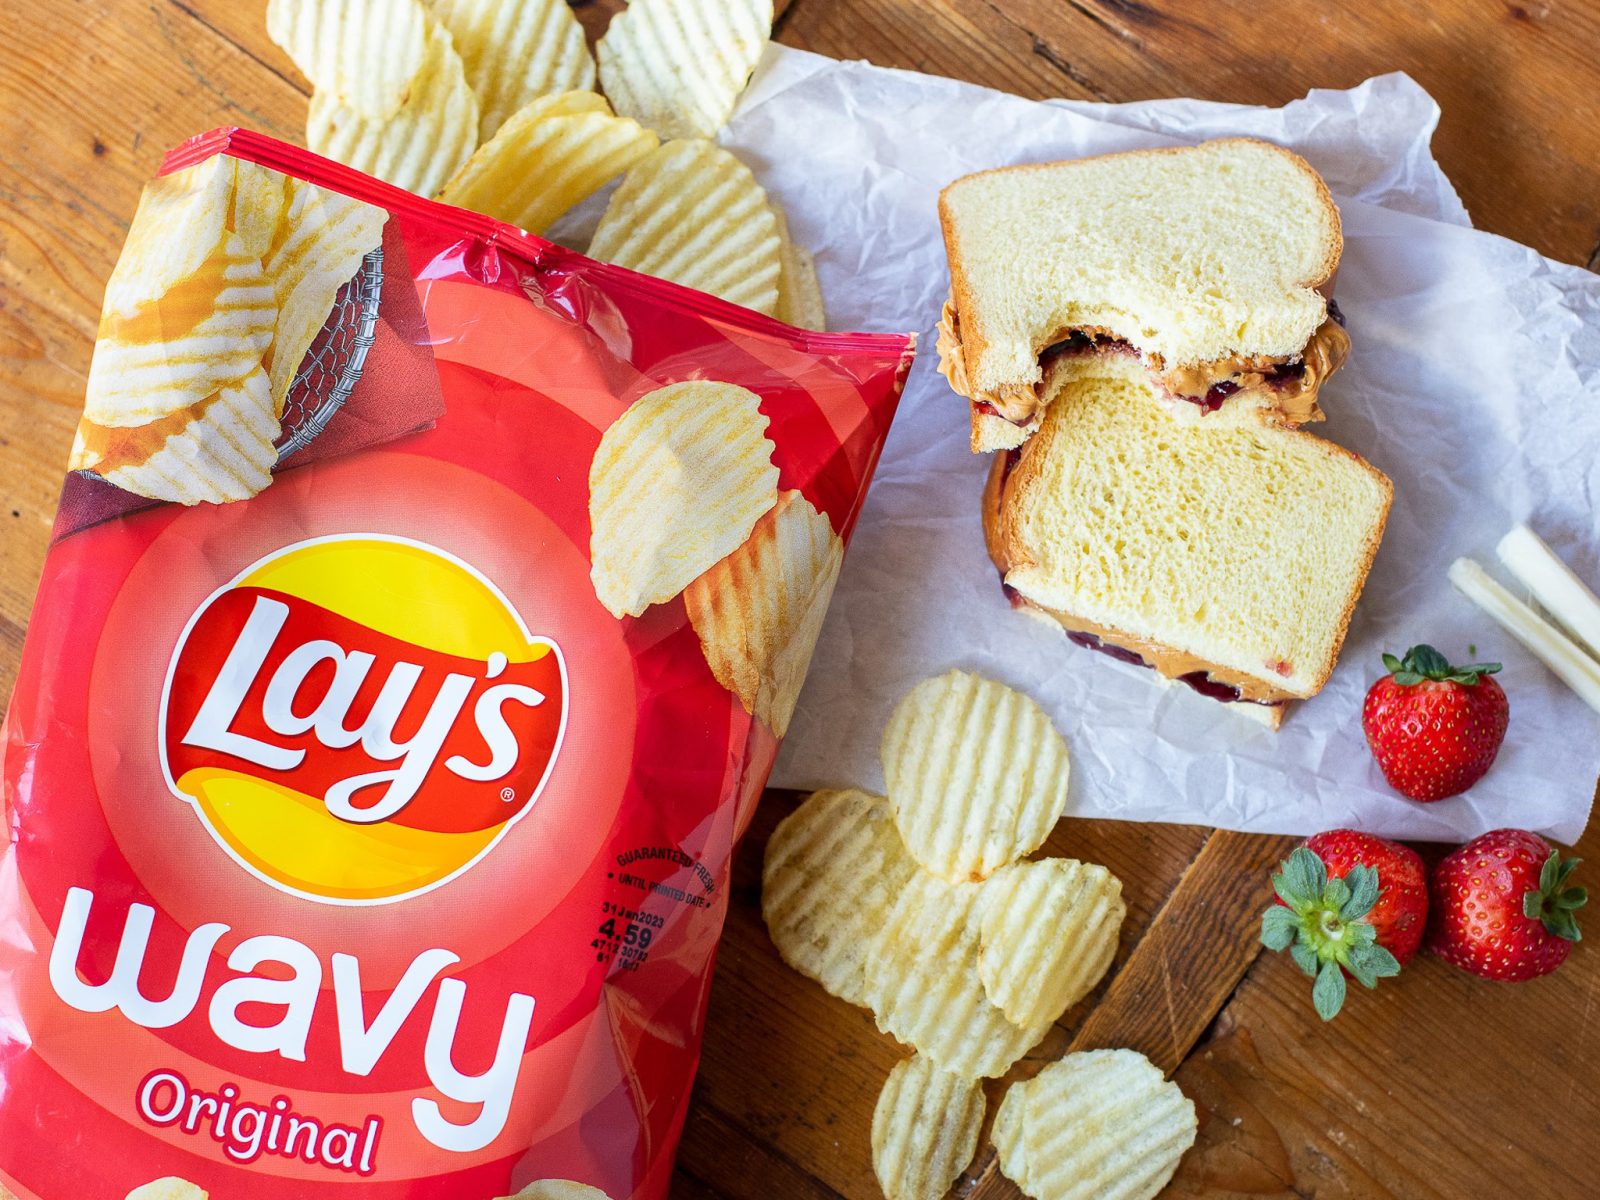 Lay’s Chips As Low As $1.70 At Publix